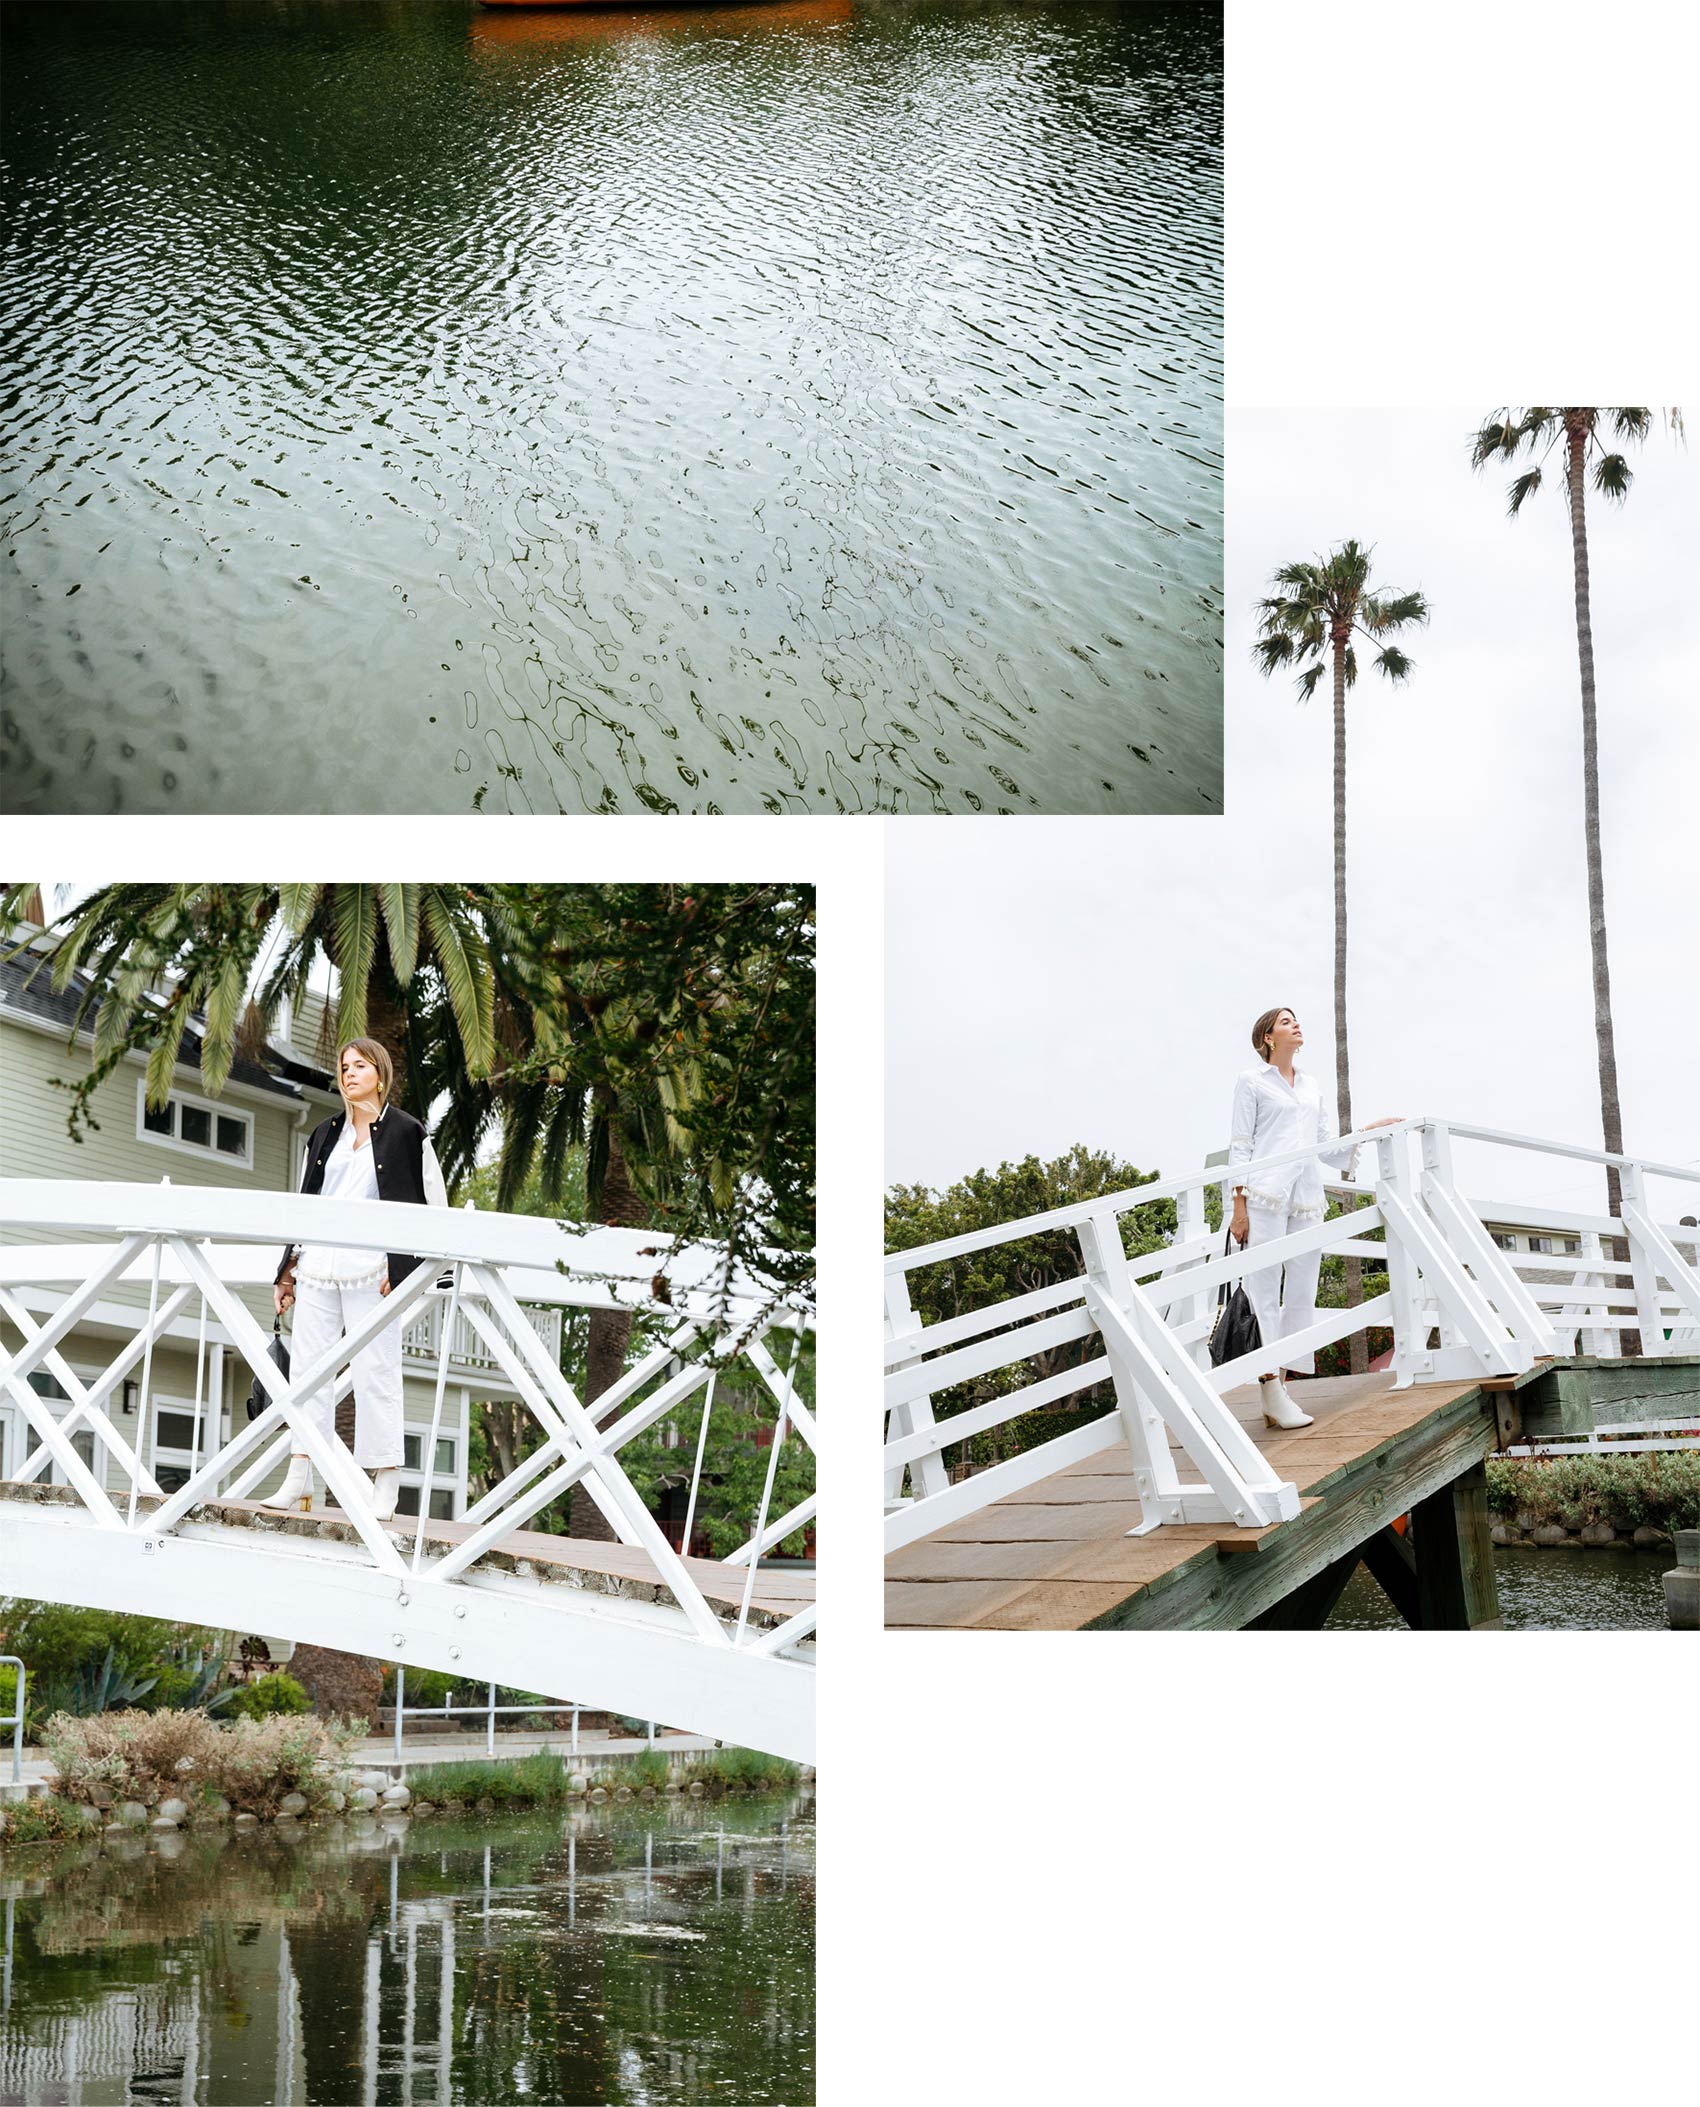 Blogger Maristella visits the Venice Canals in California